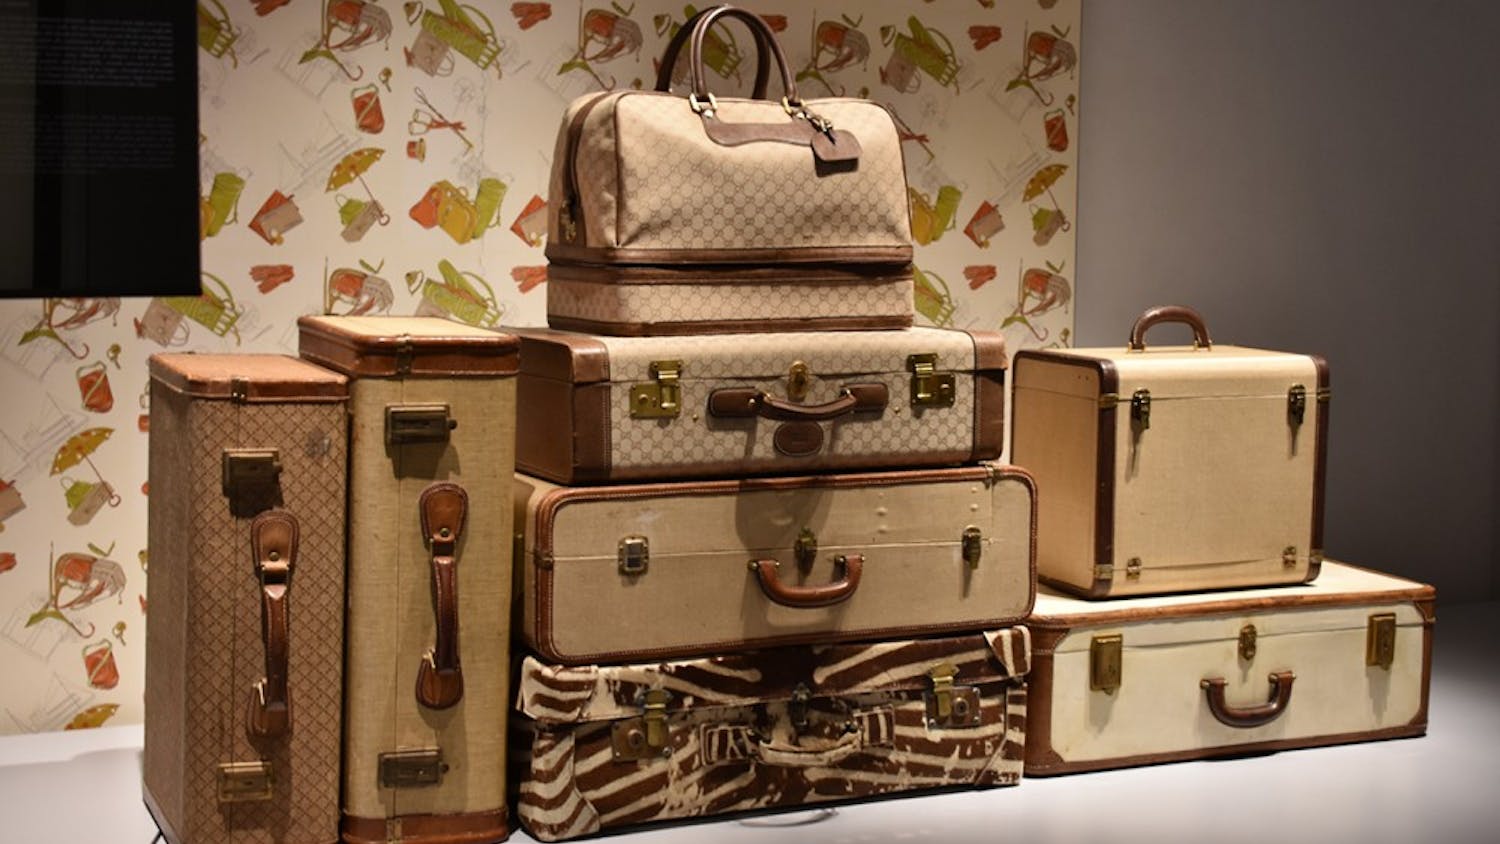 Suitcases designed by Gucci during the 20th century are highlighted in one section of the Gucci Museo in Florence.